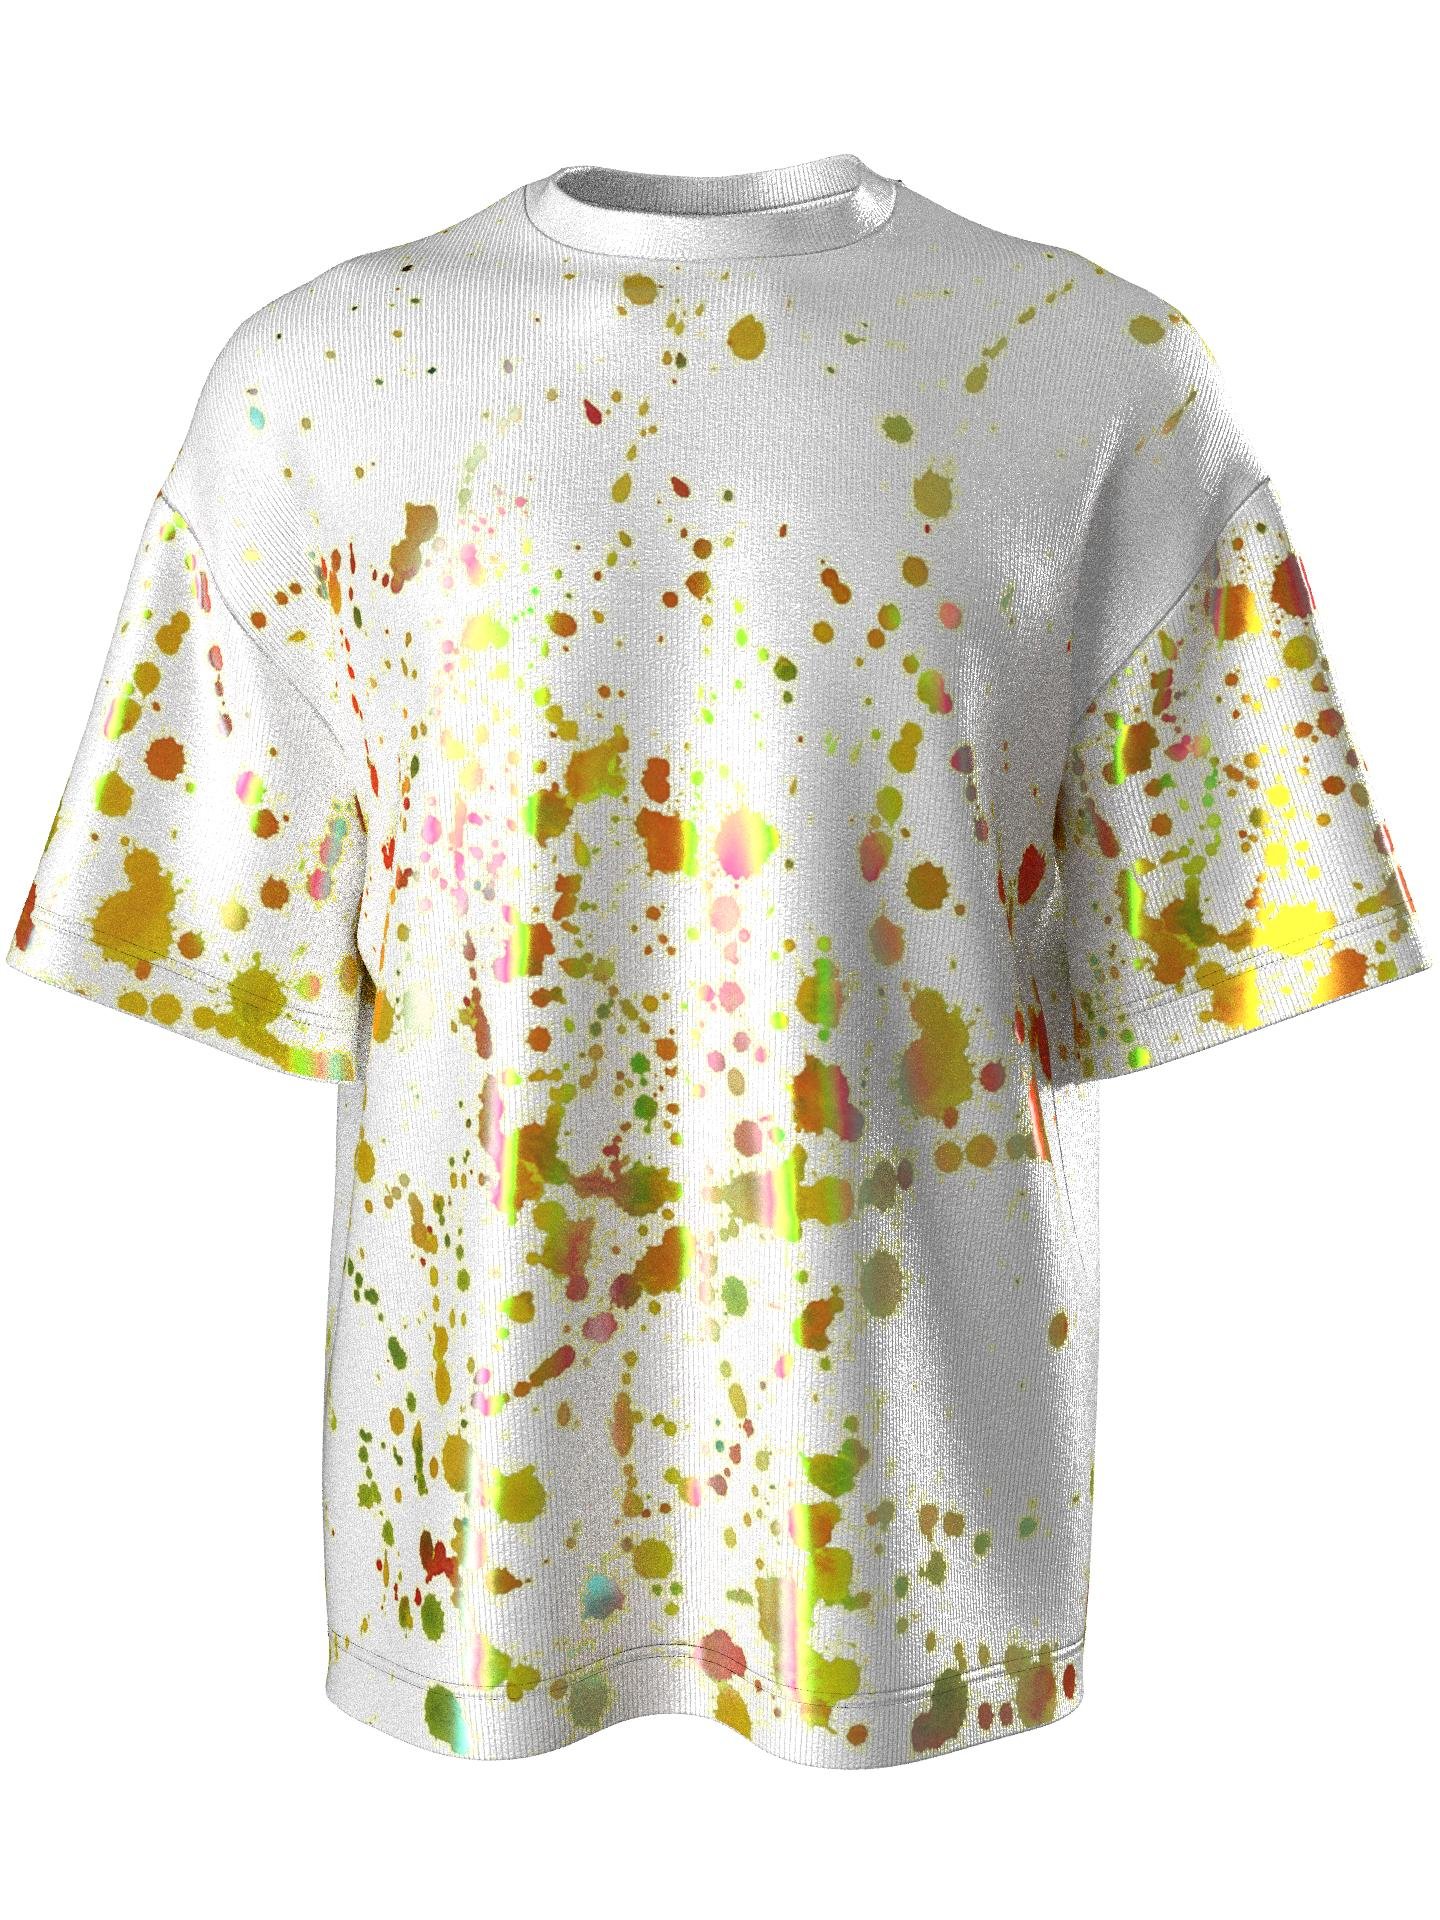 T-shirt with color splash white by SDGS INSPIRED COLLECTION